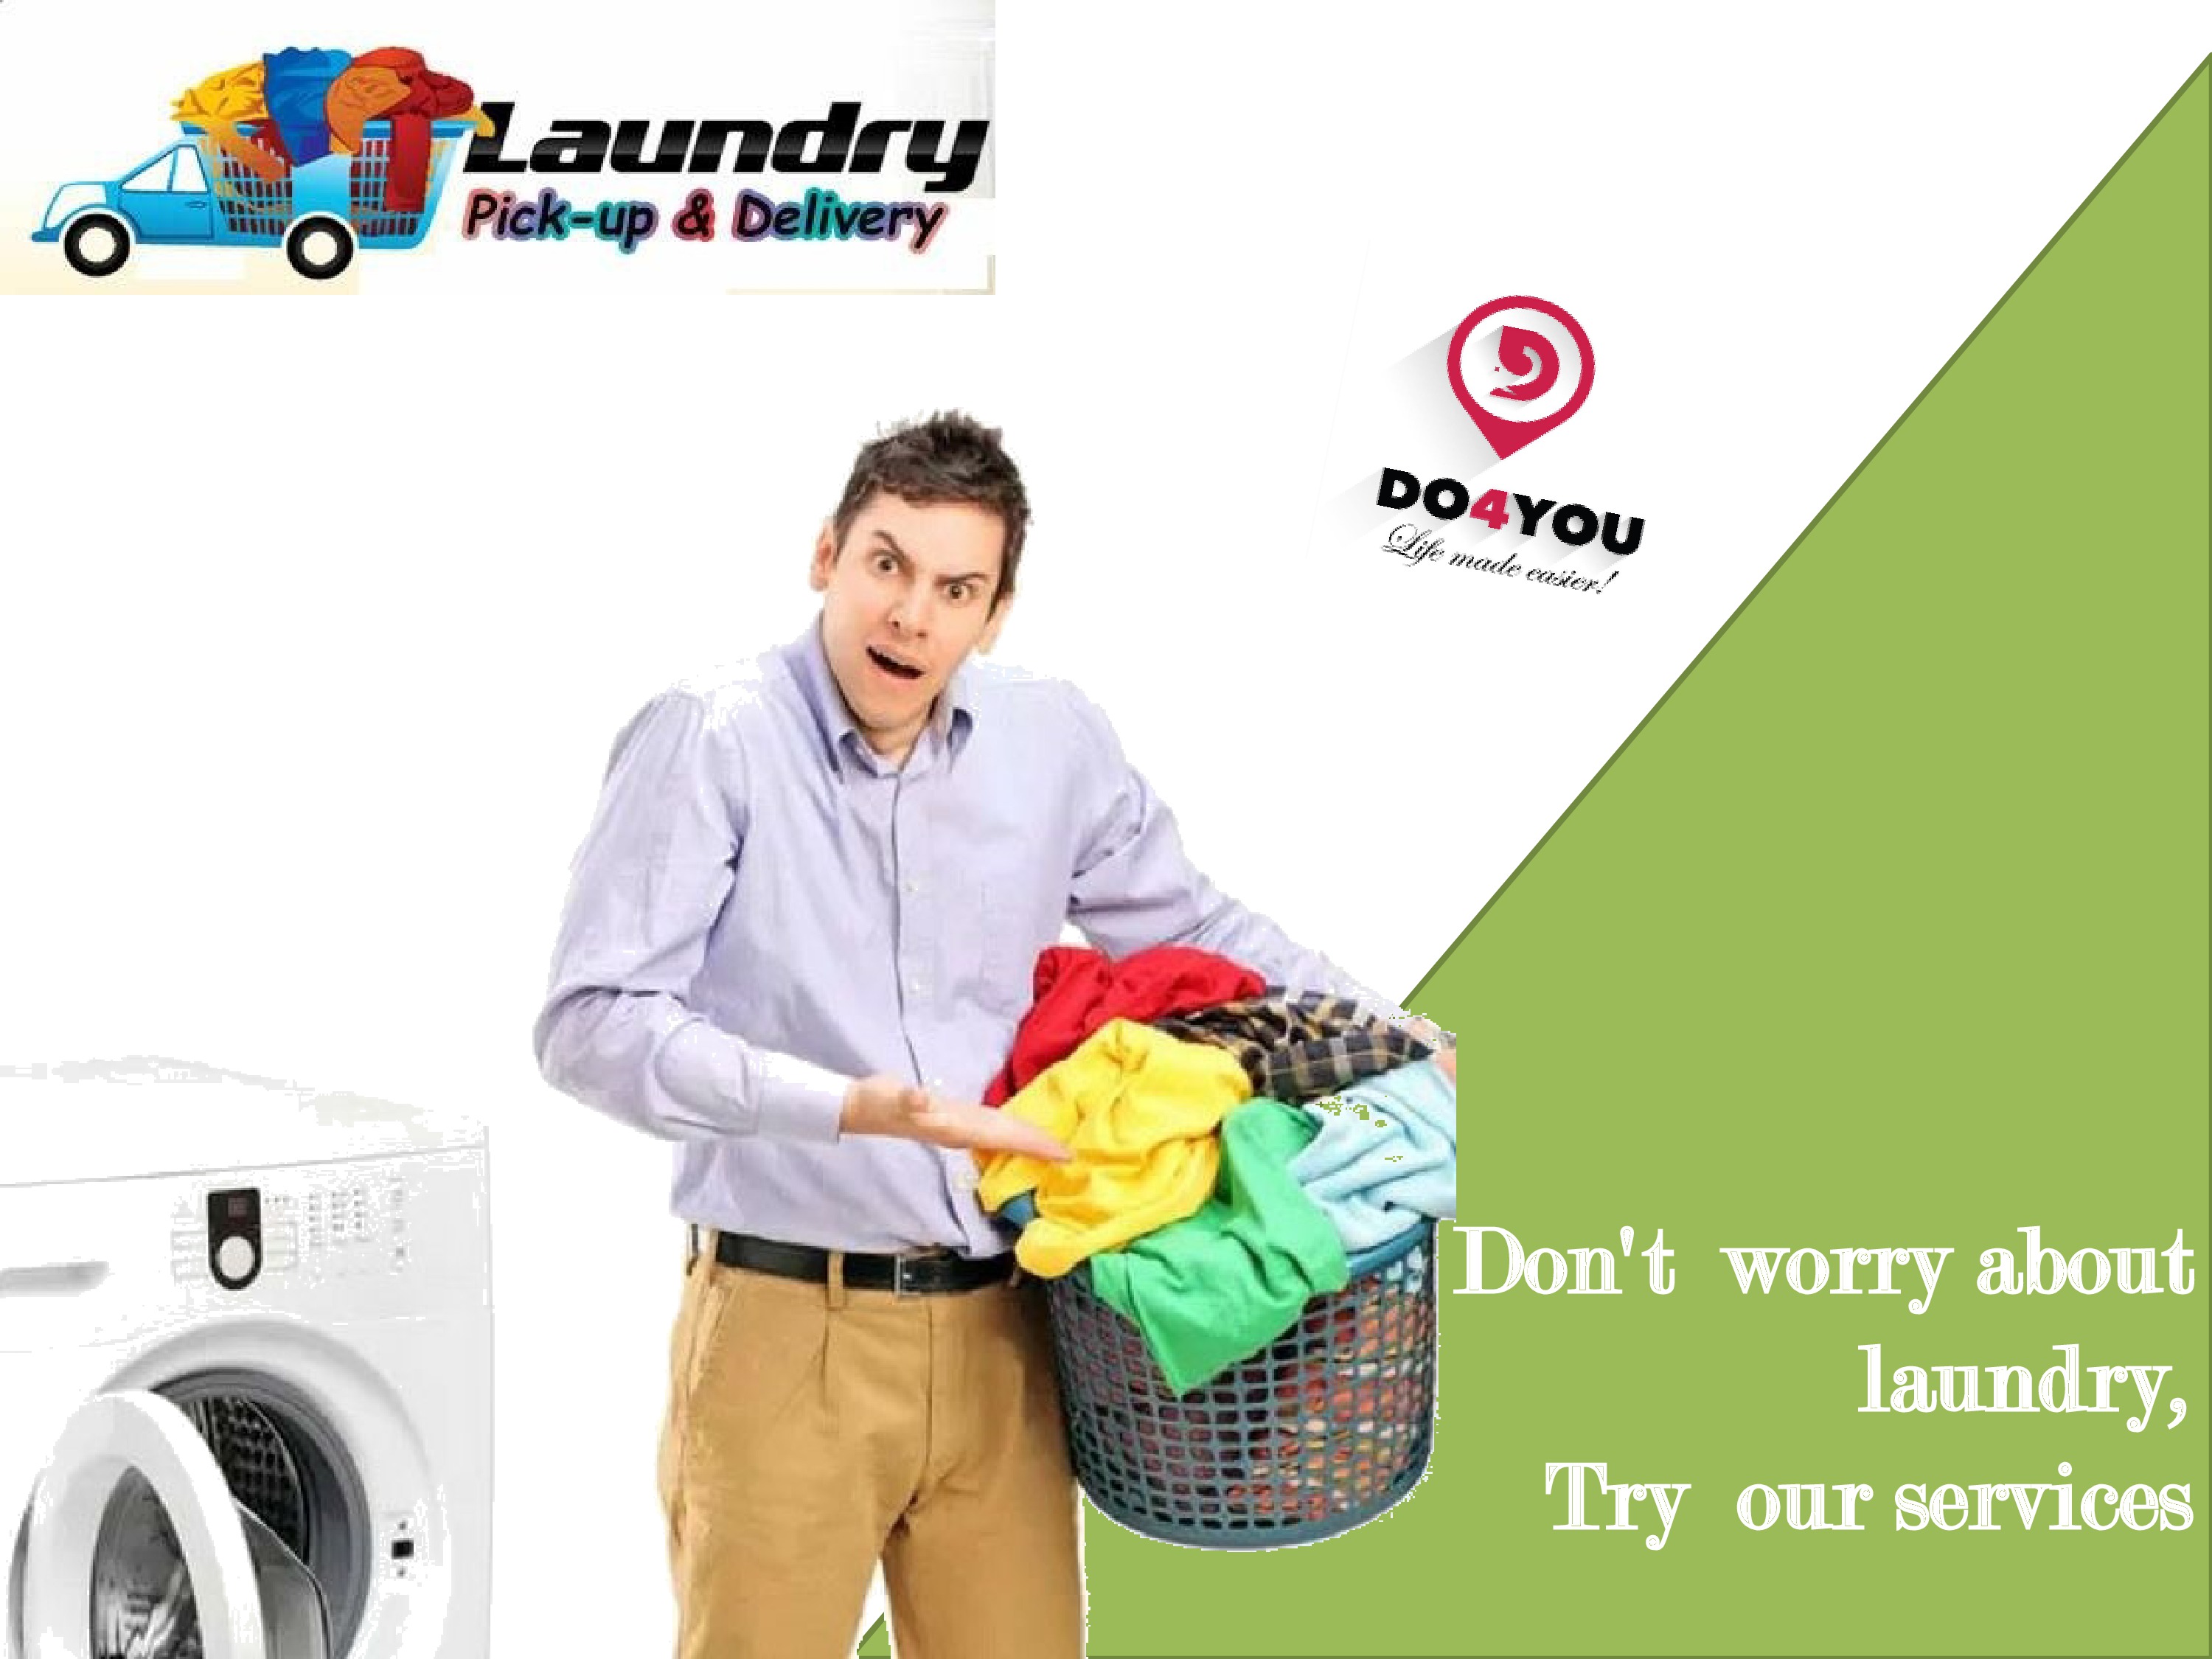 Laundry Services at DO4YOU.jpg  by DO4YOU